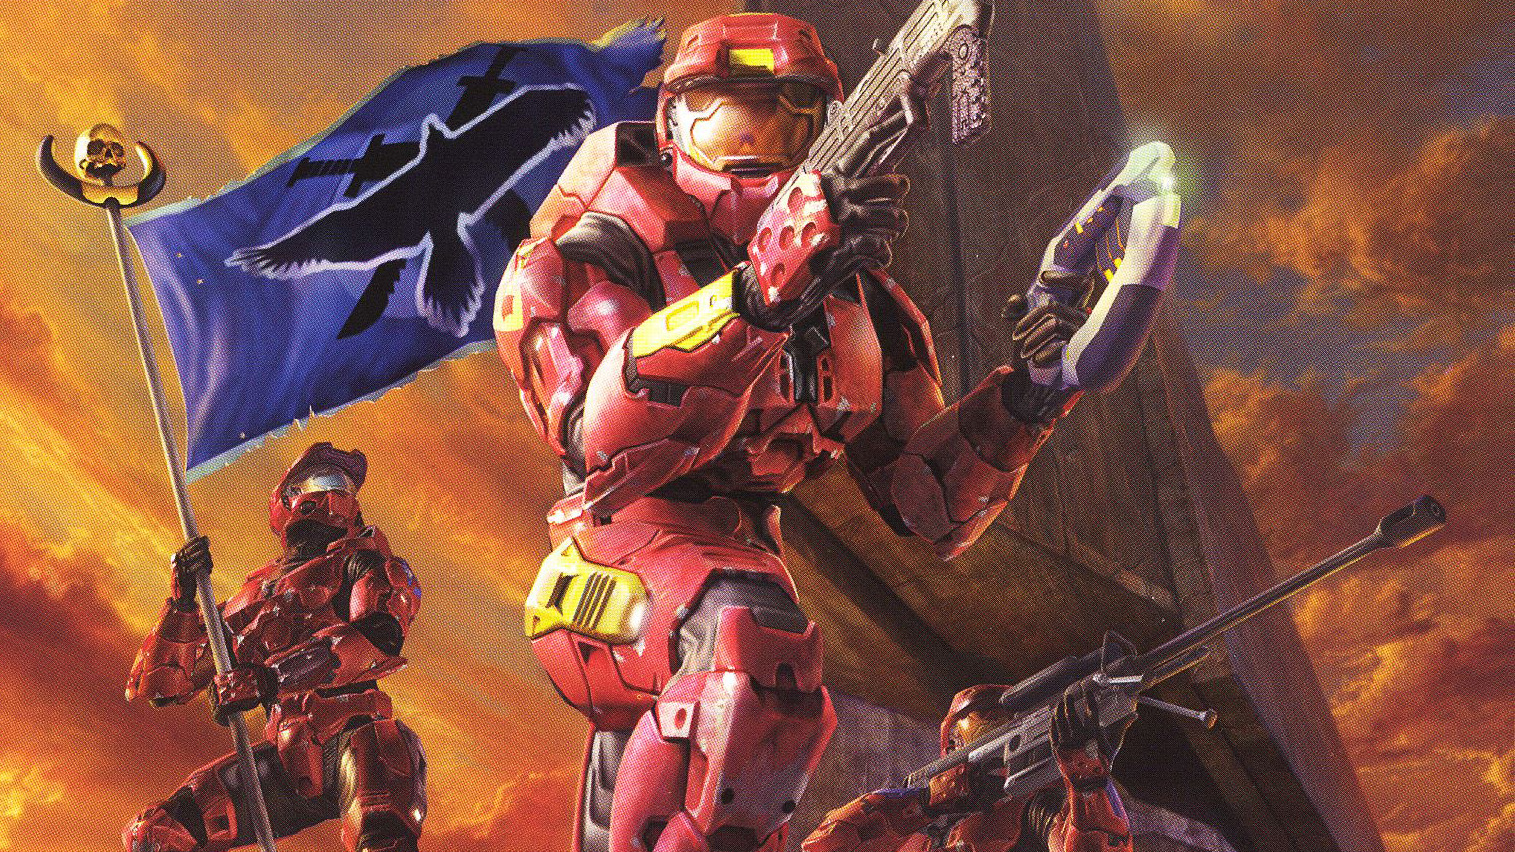 Read more about the article Halo Multiplayer Modes Ranked From Worst to Best